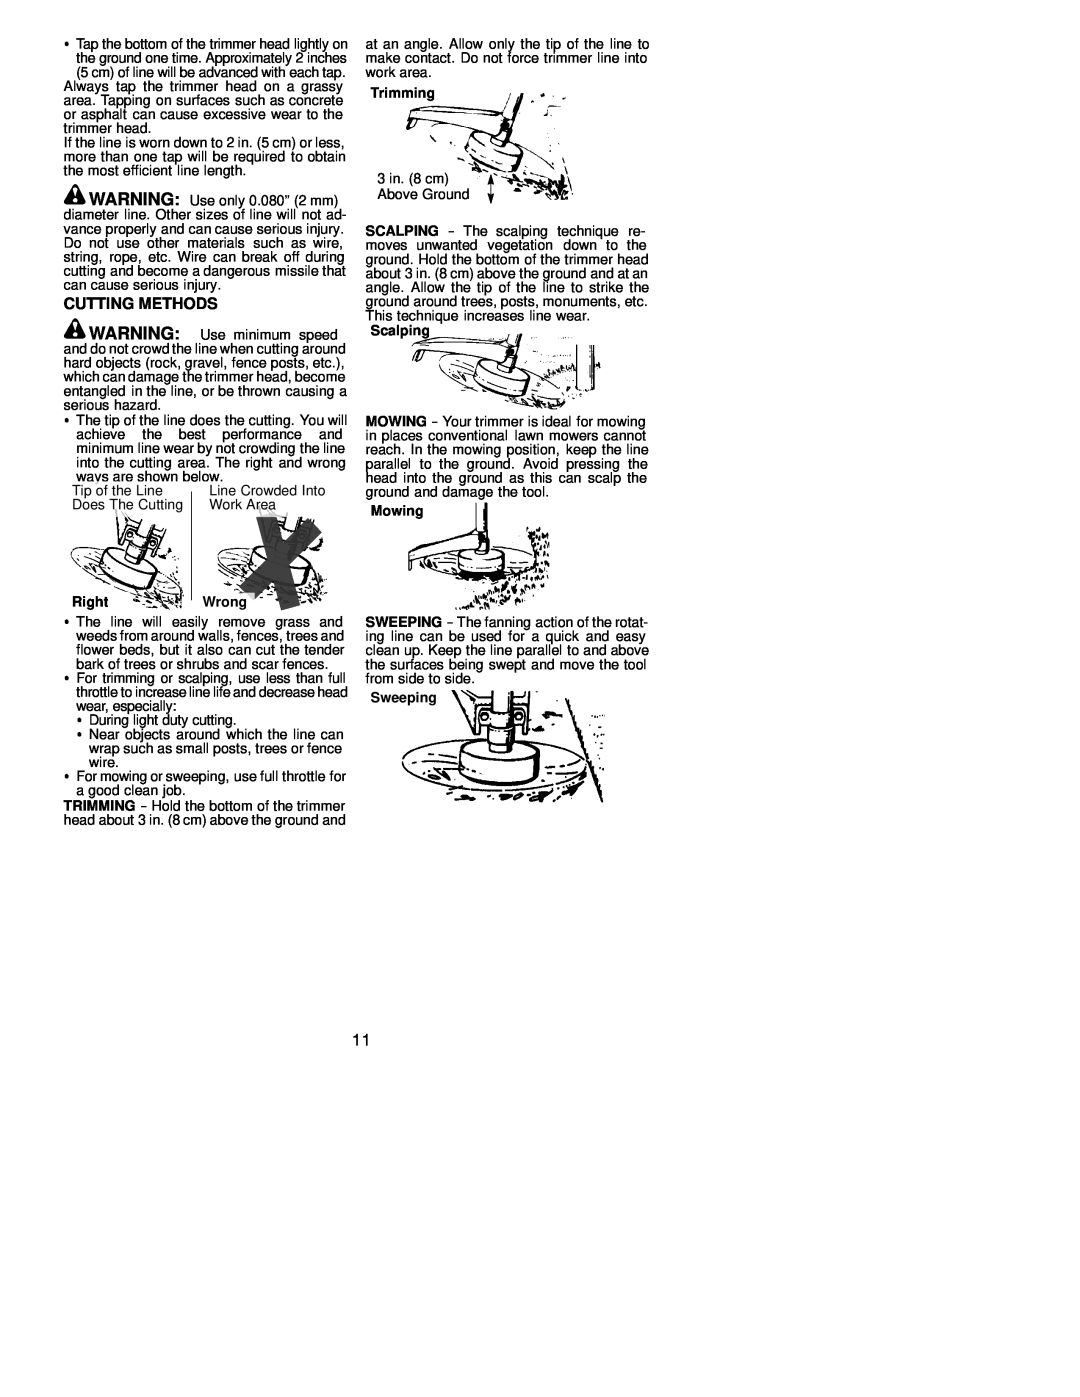 Poulan 530163516 instruction manual Cutting Methods, RightWrong, Trimming, Scalping, Mowing, Sweeping 